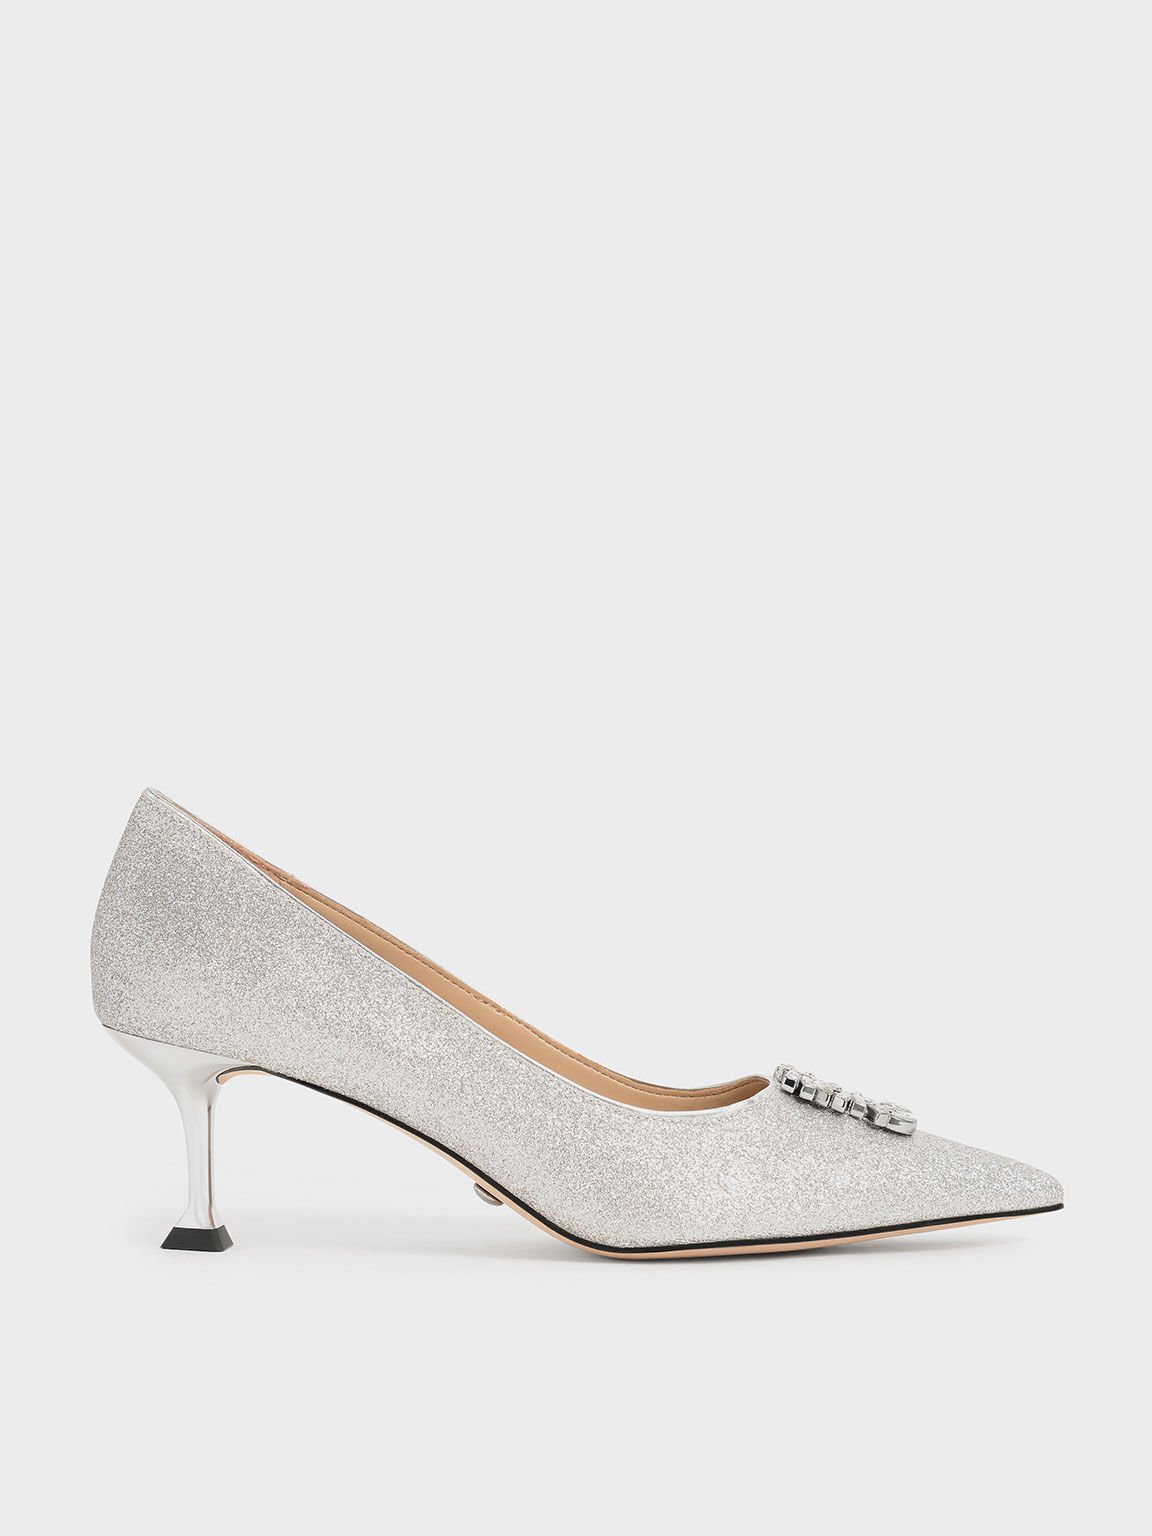 Buy Silver Heeled Shoes for Women by Ginger by lifestyle Online | Ajio.com